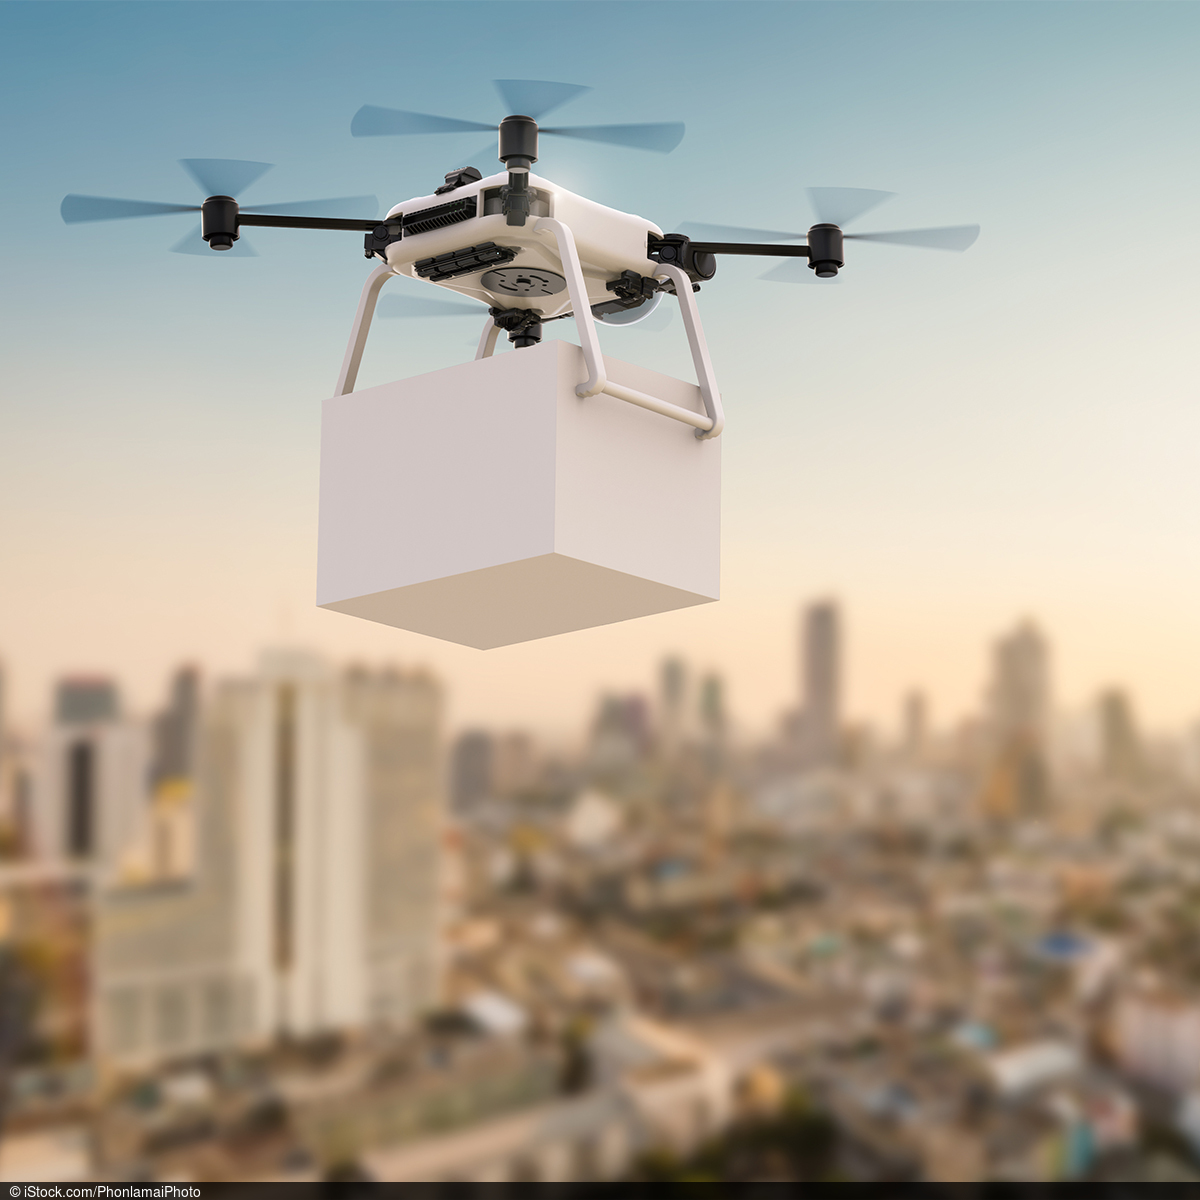 Image a drone with a package in front of a city